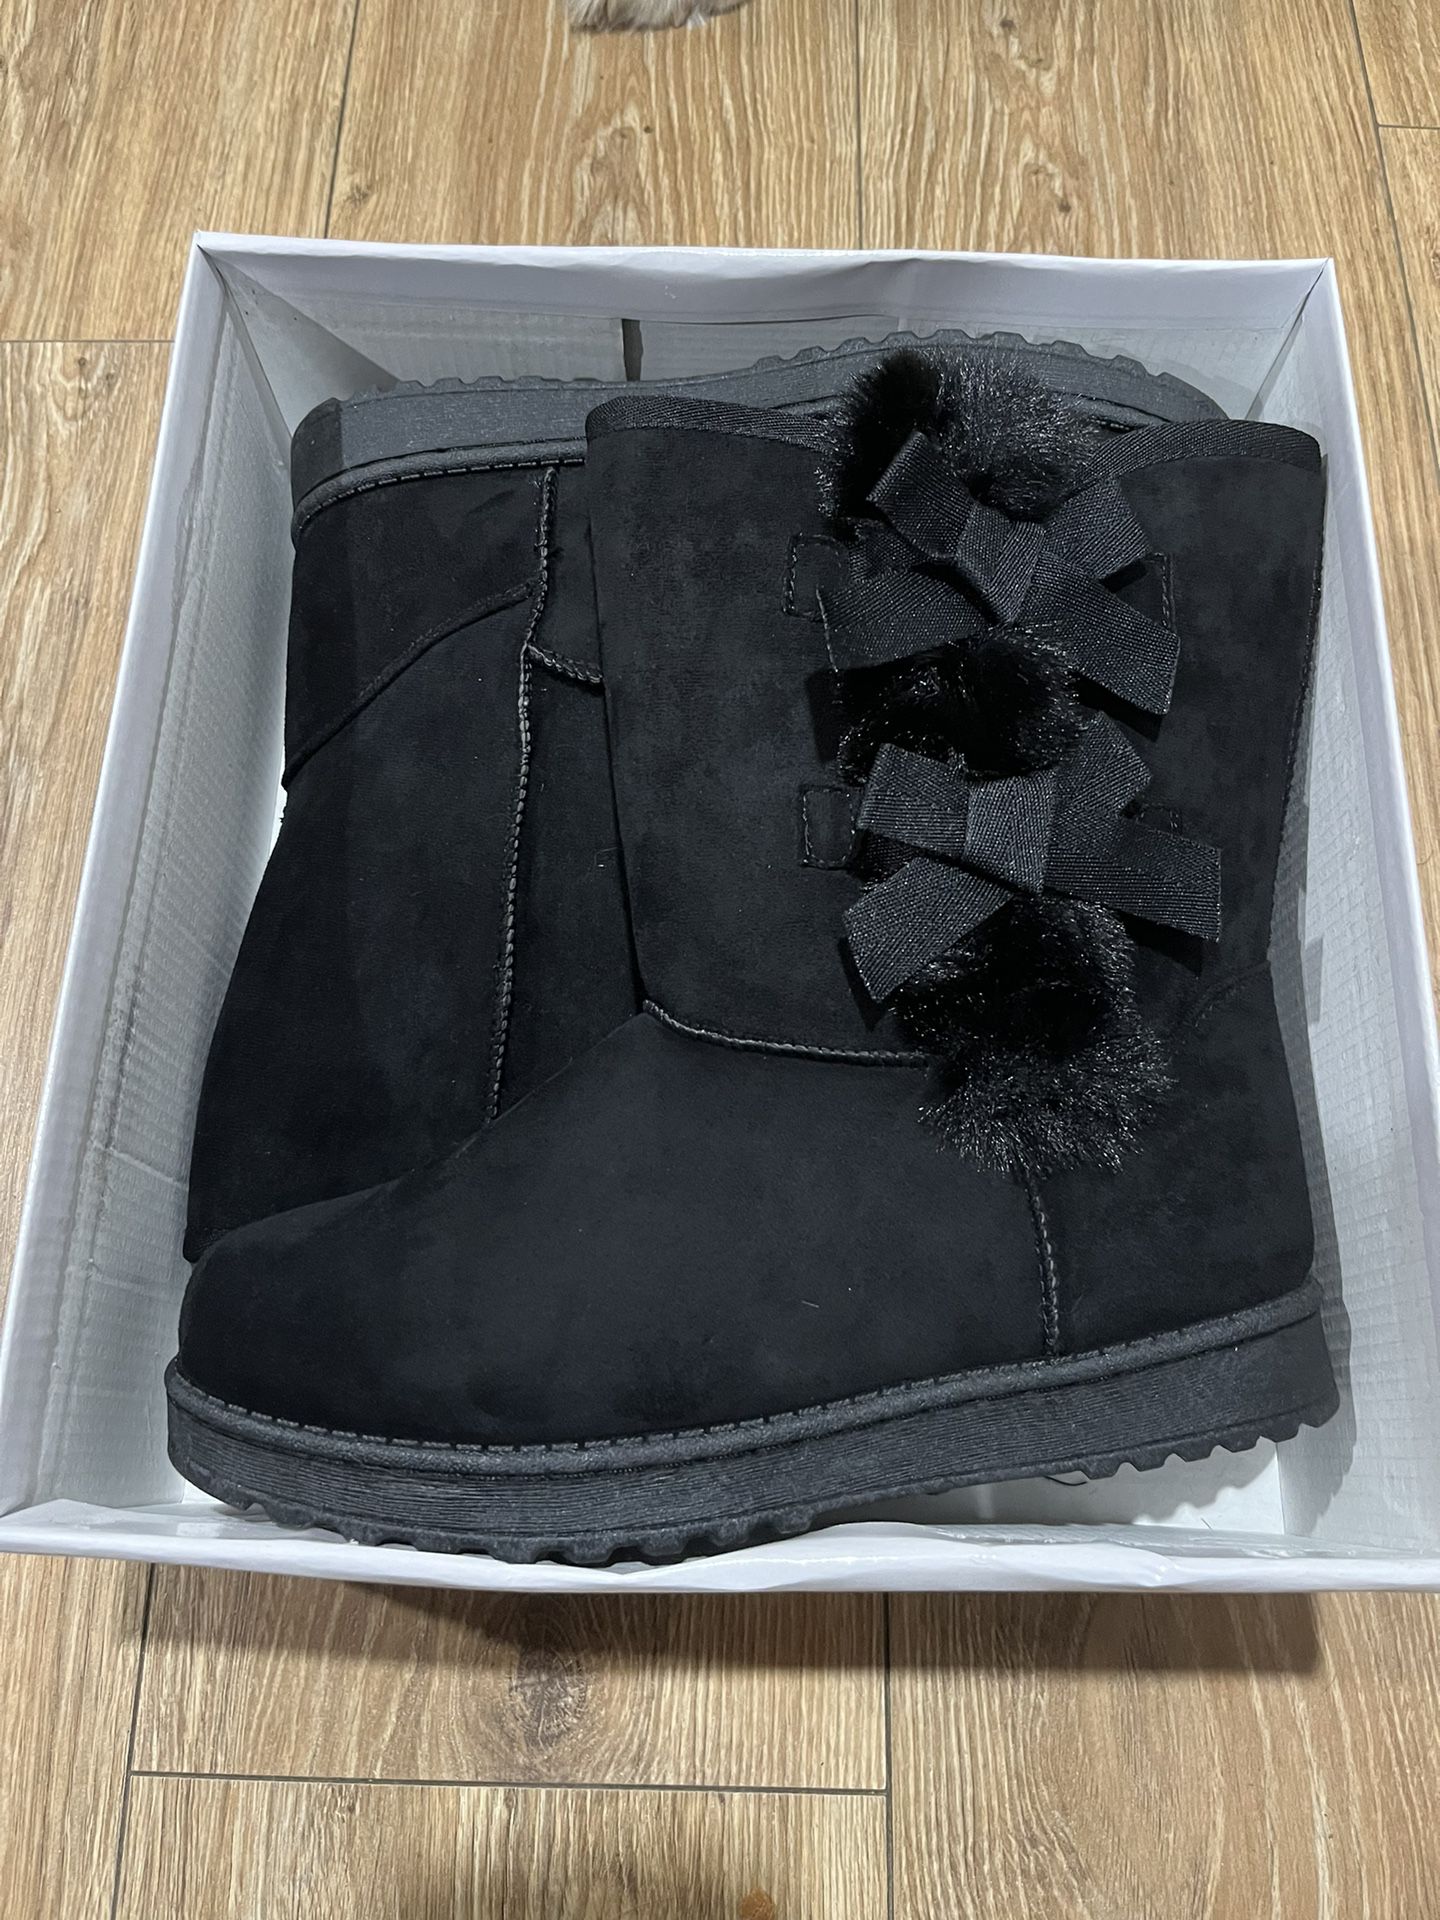 Winter Snow Boots for Women Mid Calf Warm Fur Lined 